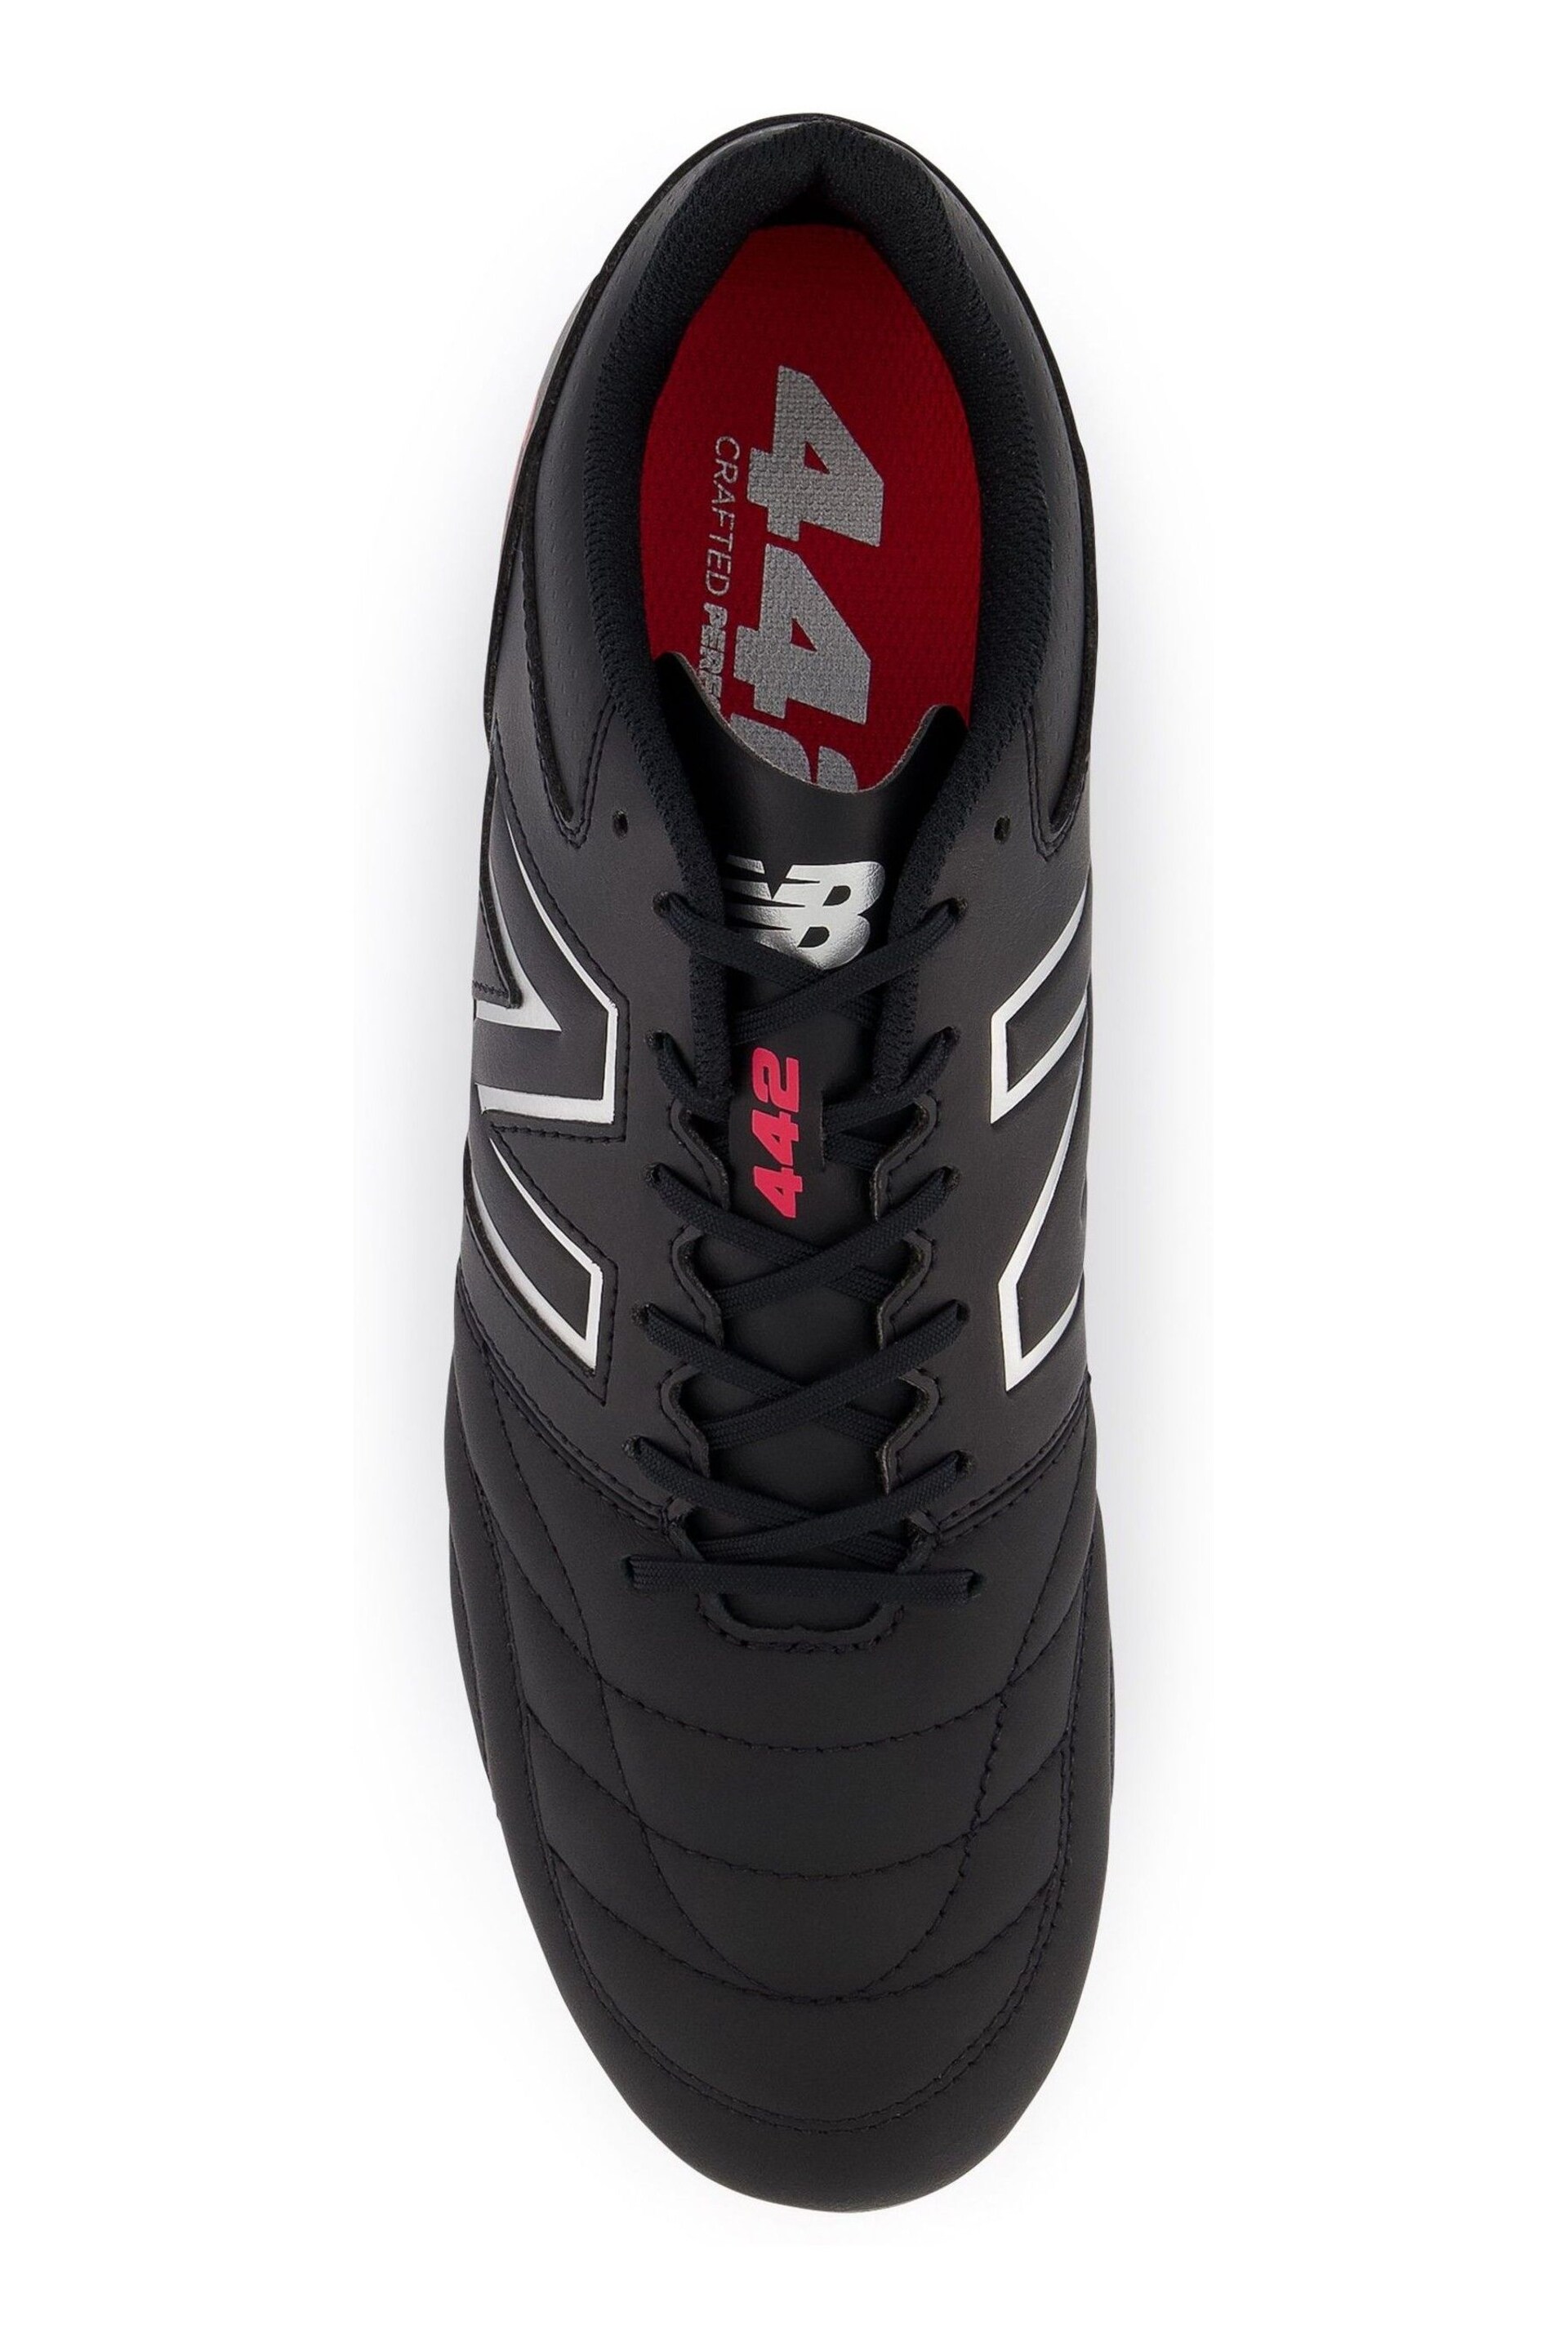 New Balance Black Mens 442 Firm Football Boots - Image 5 of 6